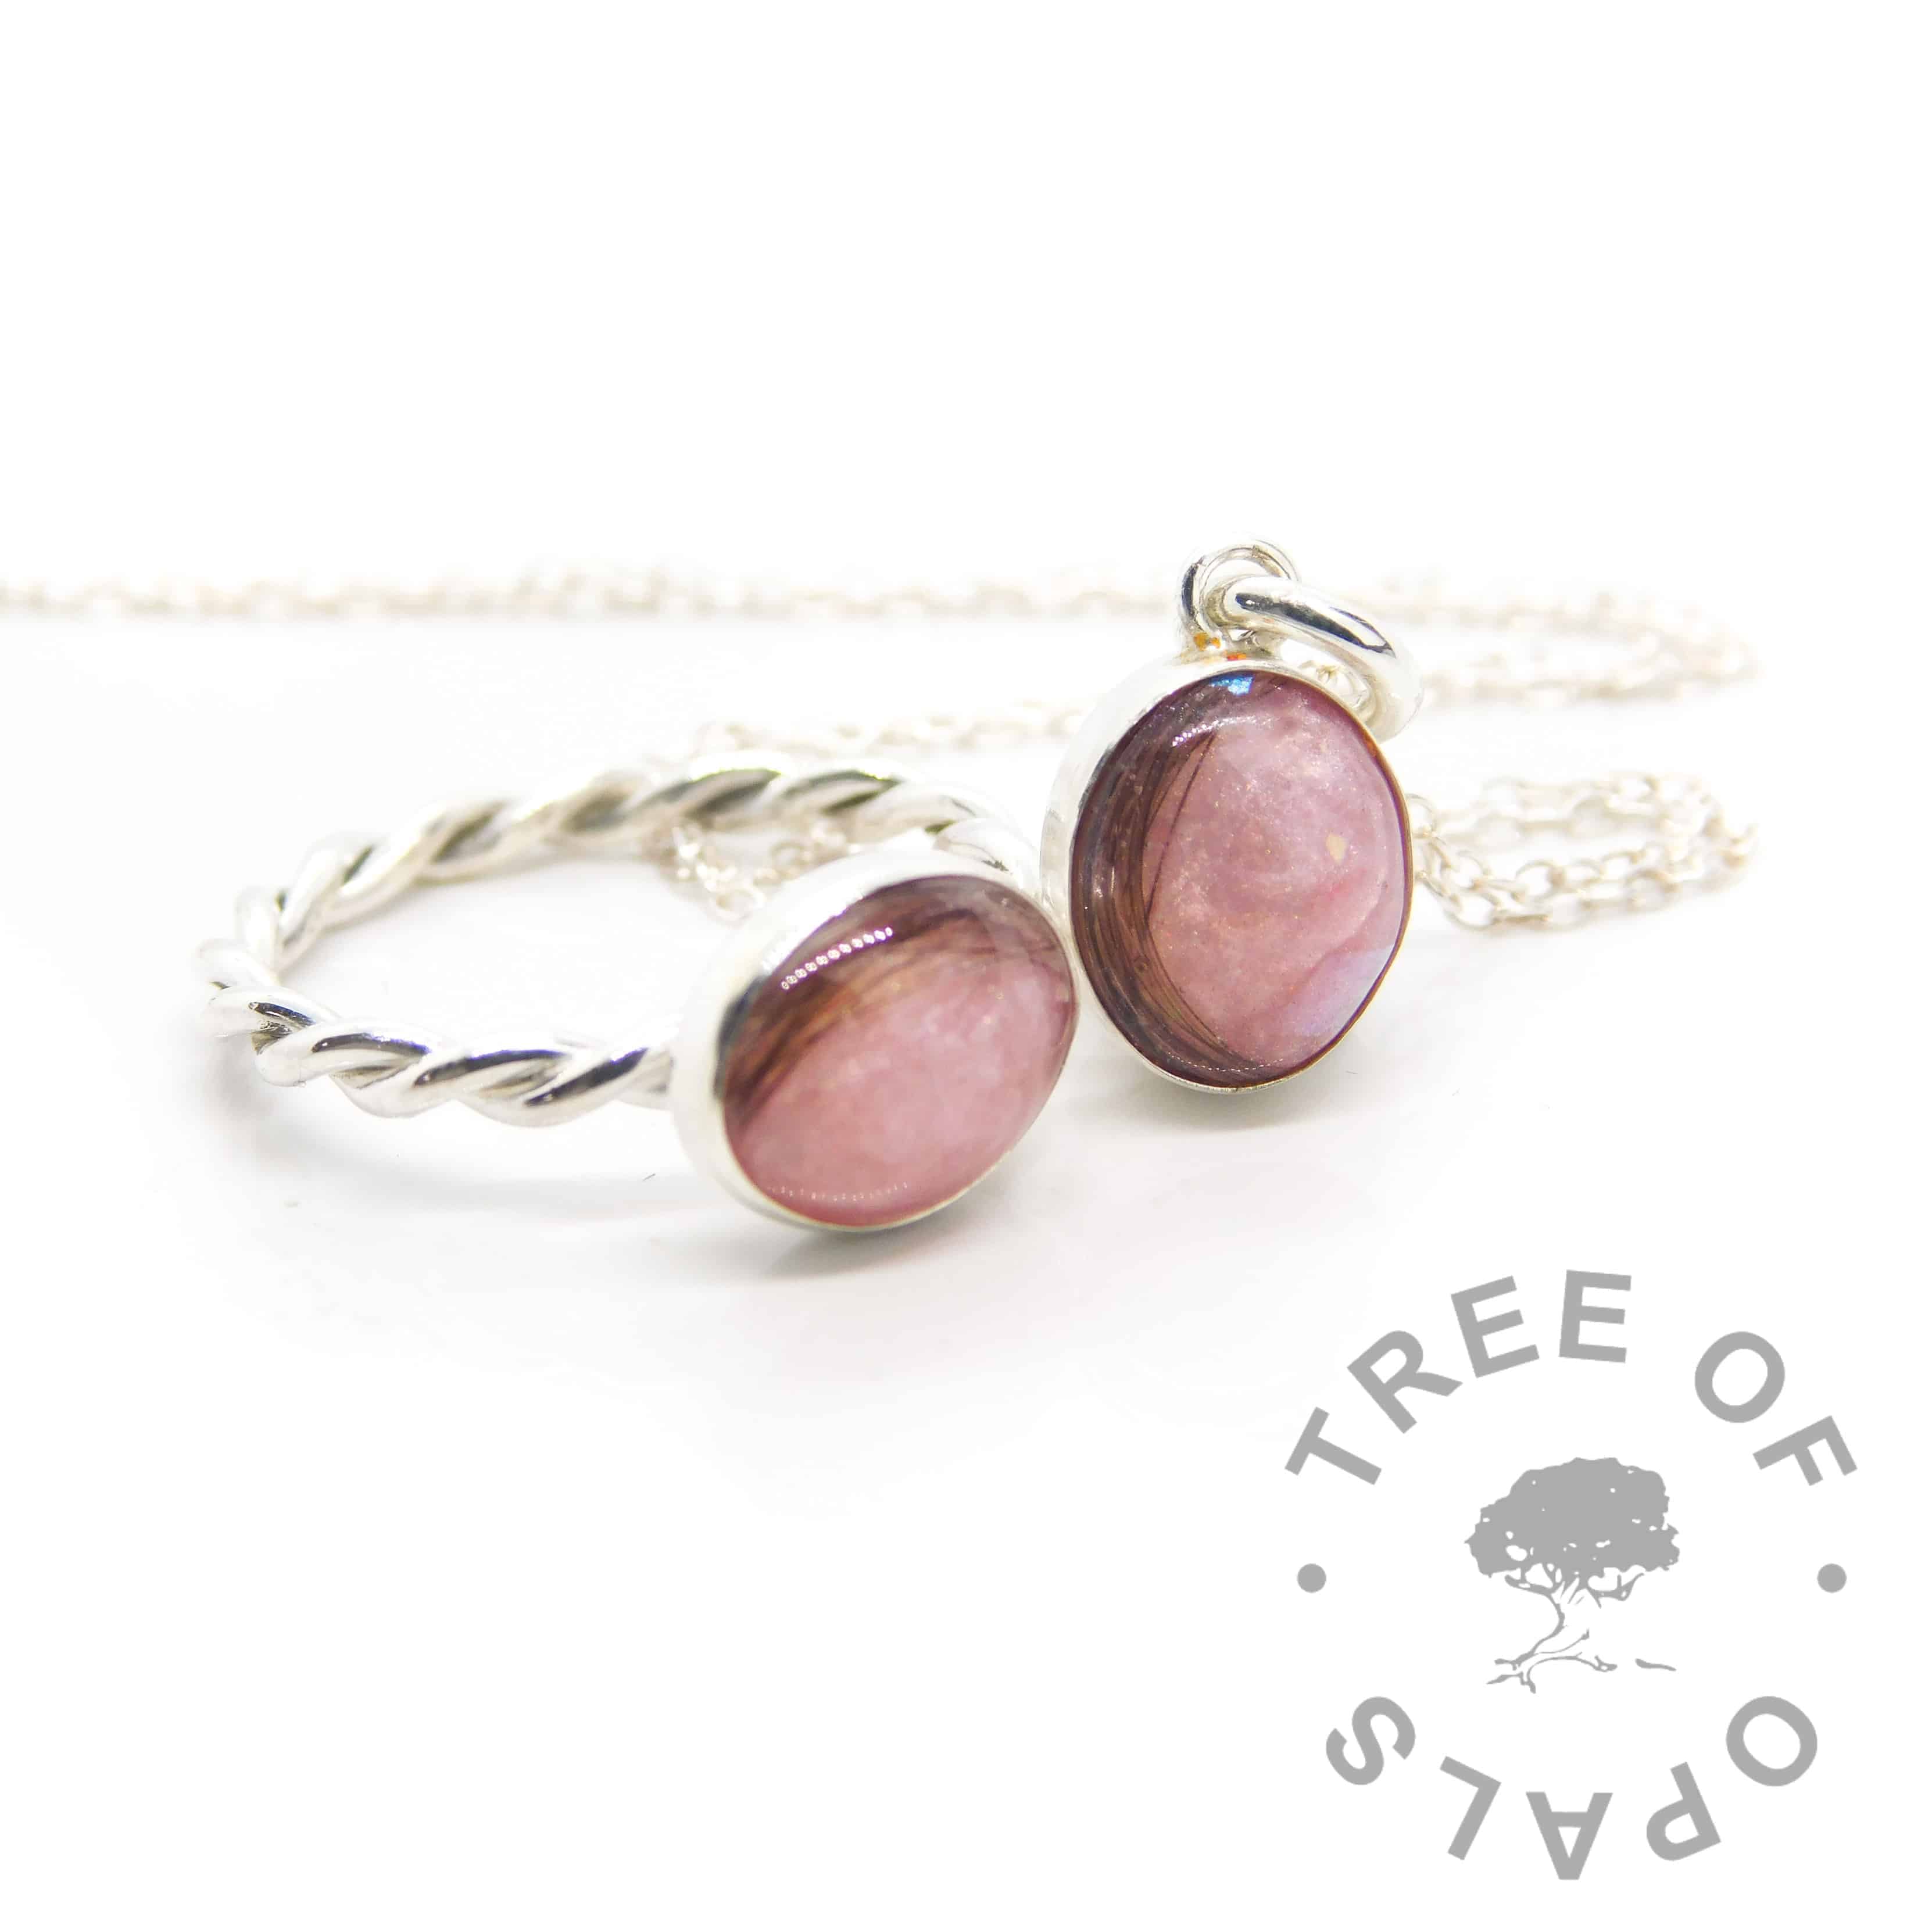 pink lock of hair necklace in asolid sterling silver, made as a mystery piece to accompany the pictured twisted band ring